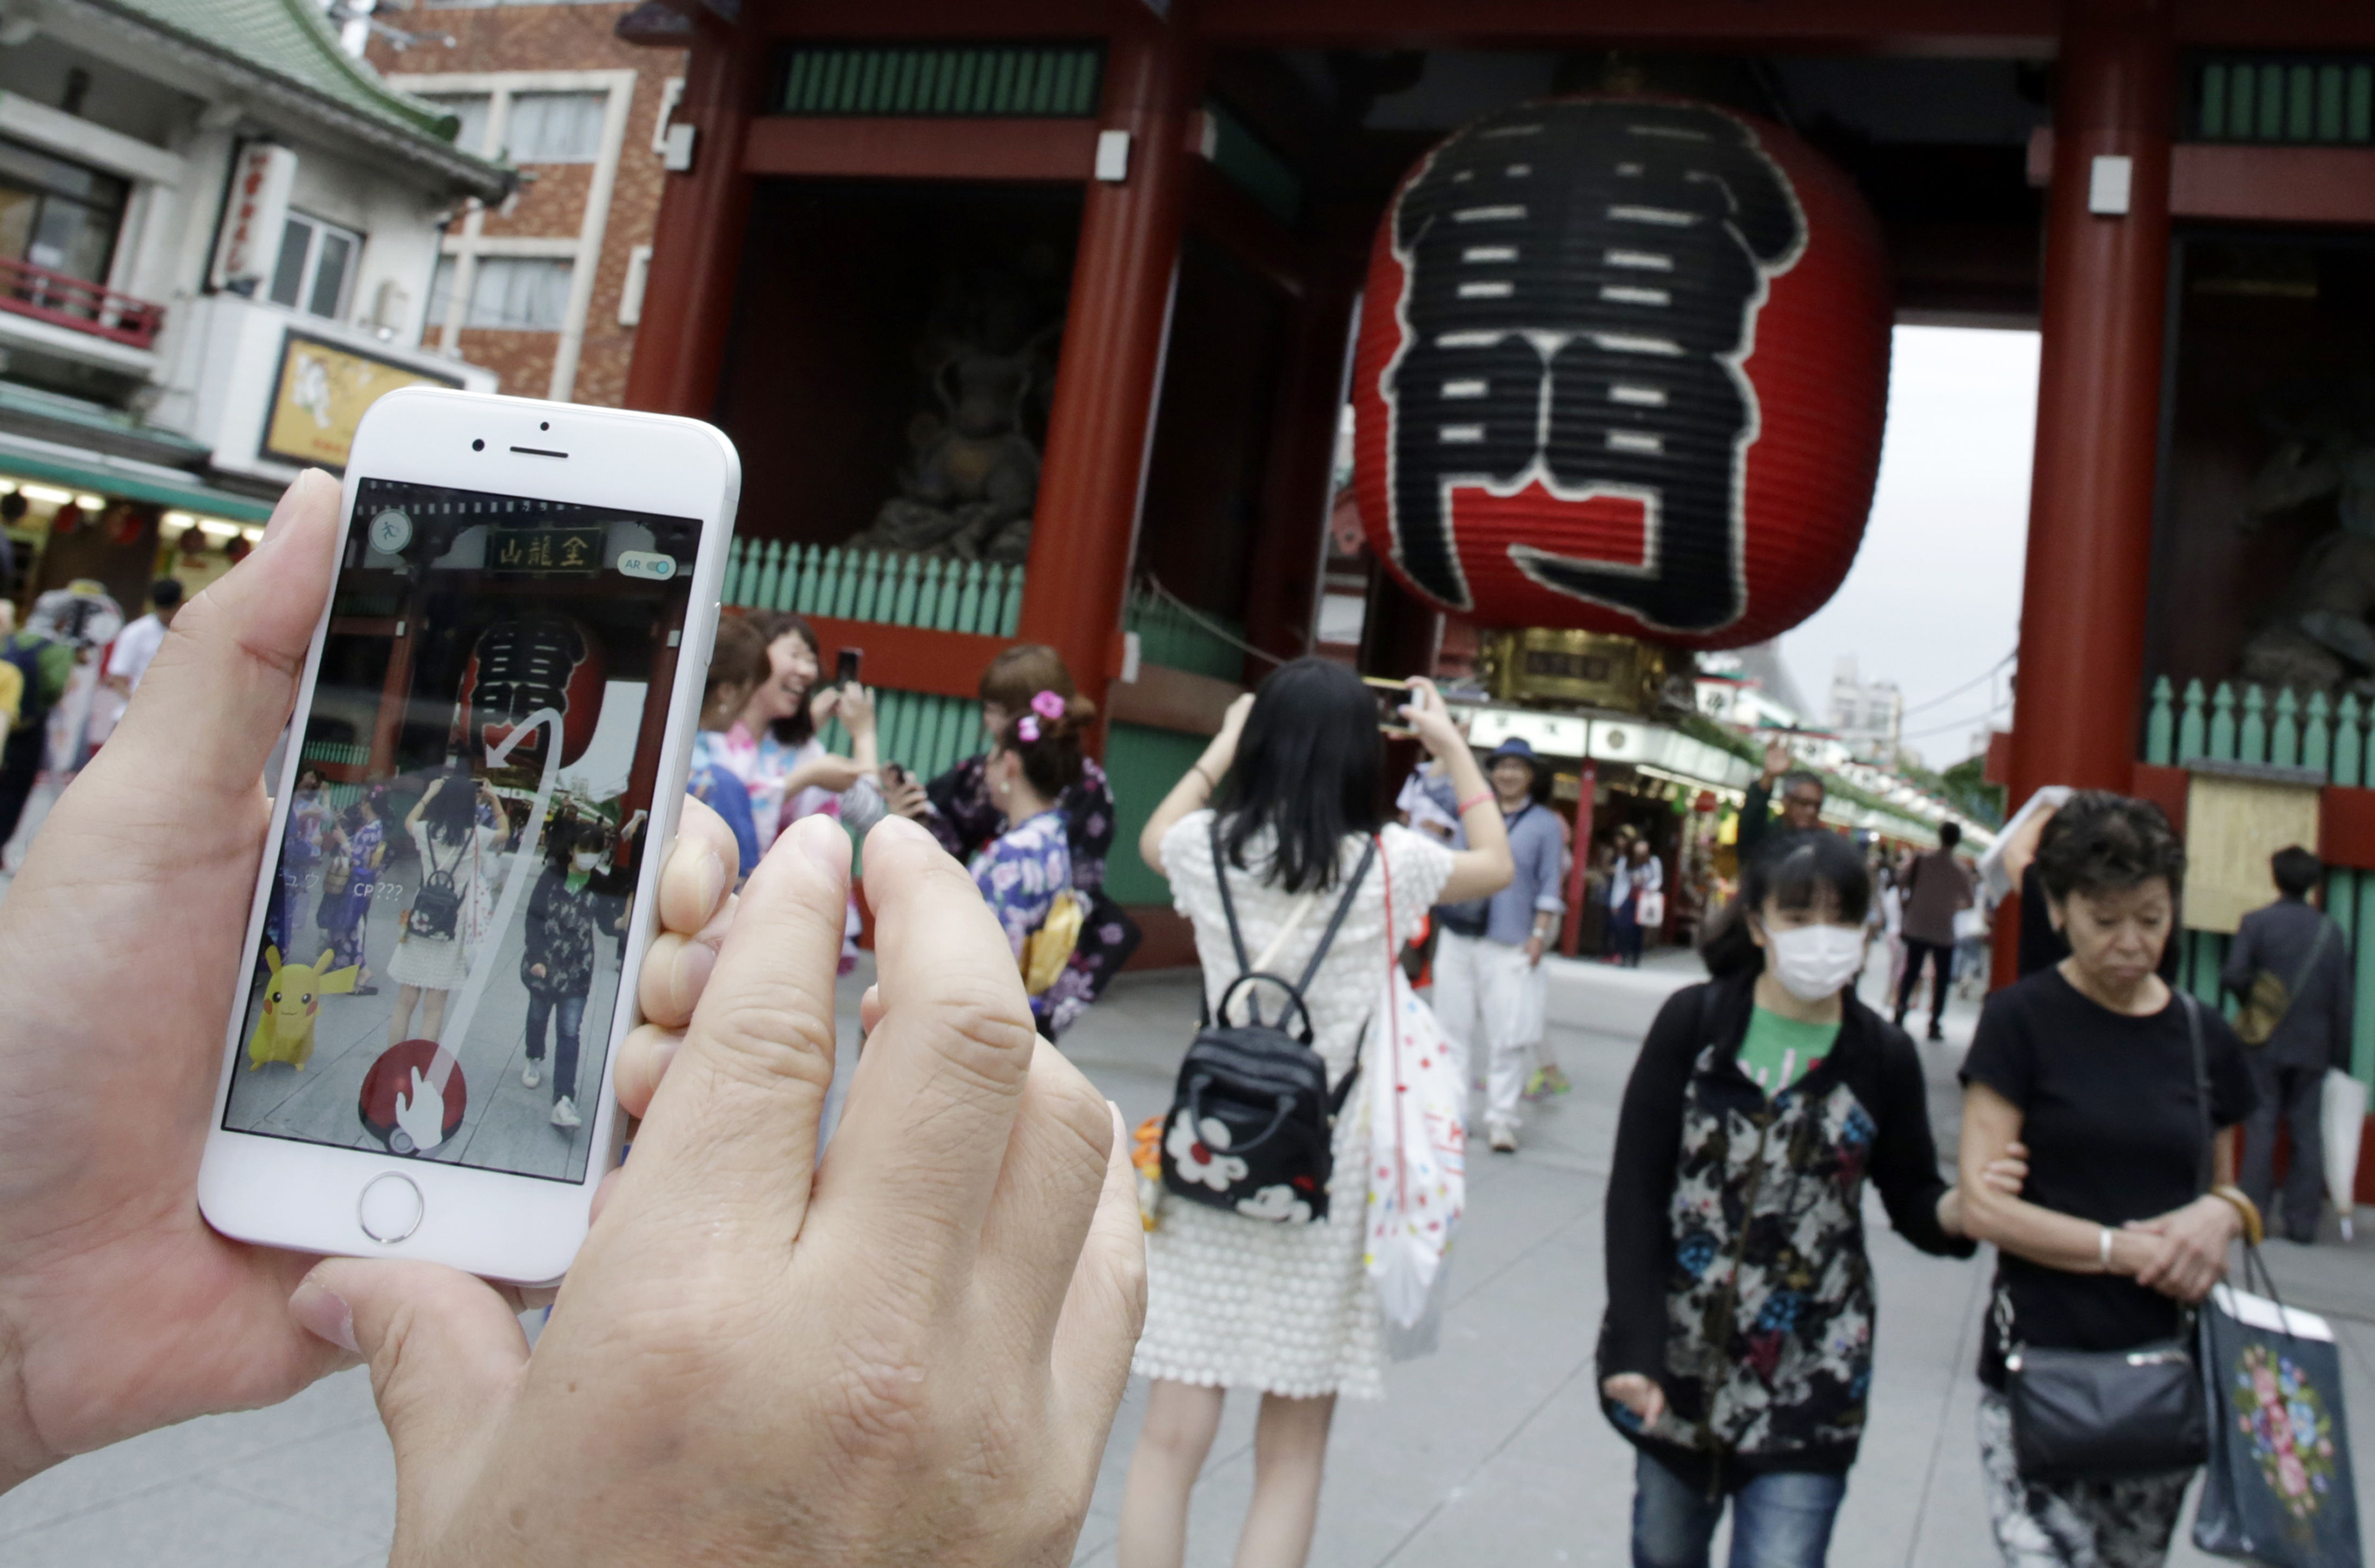 A man tries to catch a Pikachu, a Pokemon character, while he plays "Pokemon Go" in front of Kaminarimon, or Thunder Gate, at the Sensoji temple in Tokyo's Asakusa shopping and tourist district, Friday, July 22, 2016. Users began tweeting it was available Friday morning, and the Pokemon Co. and the developer of the augmented reality game, U.S.-based Niantic Inc., confirmed its launch shortly after. (AP Photo/Eugene Hoshiko)